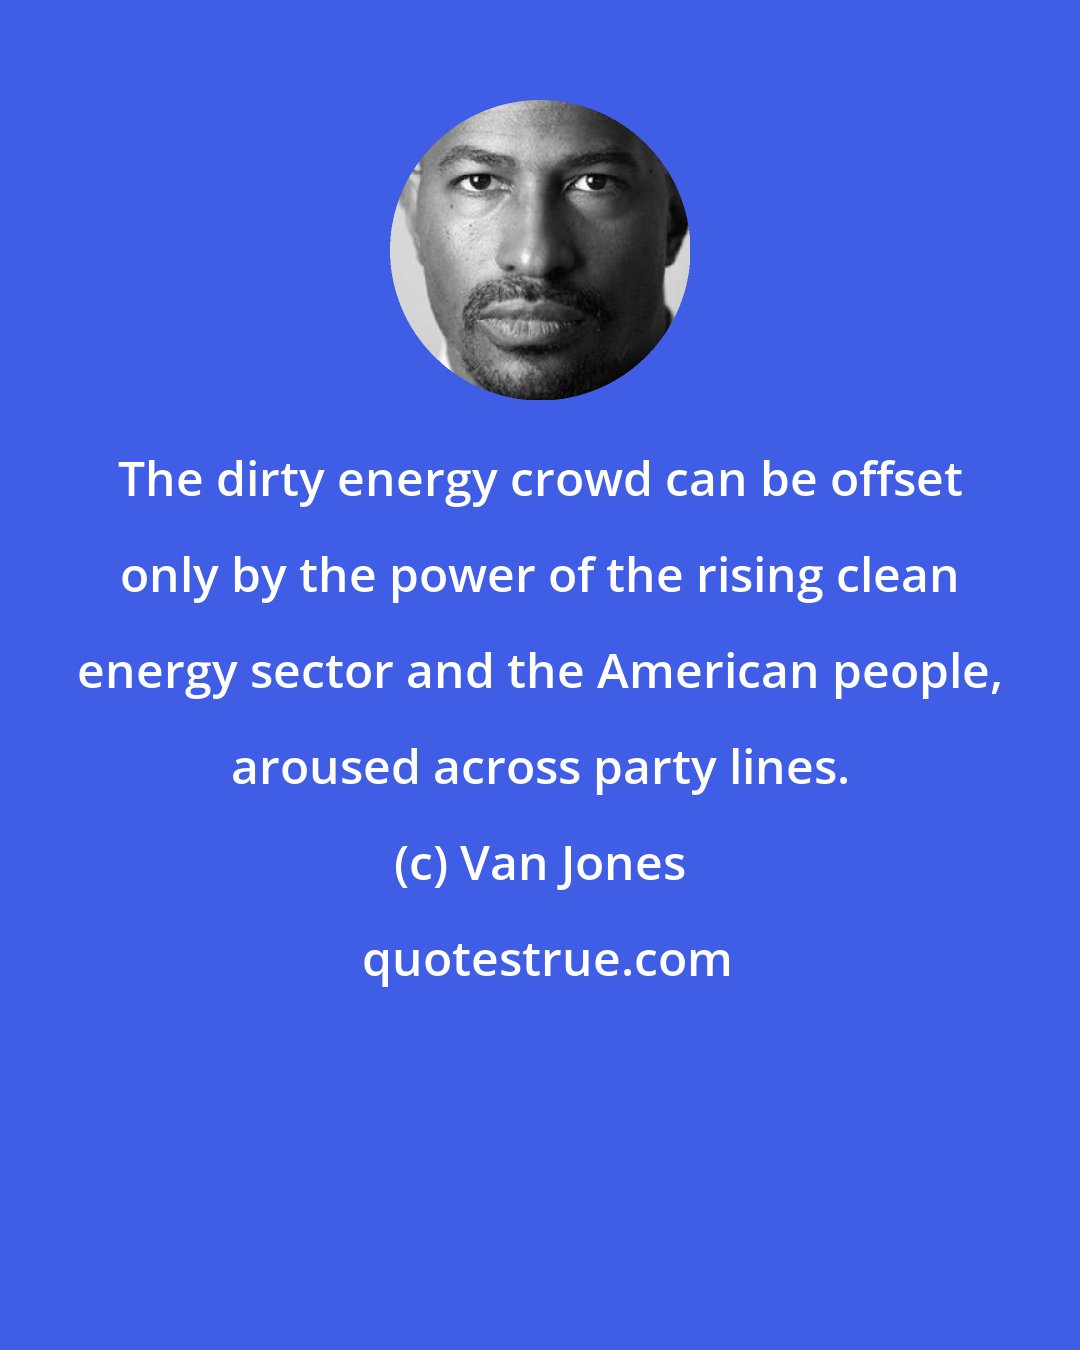 Van Jones: The dirty energy crowd can be offset only by the power of the rising clean energy sector and the American people, aroused across party lines.